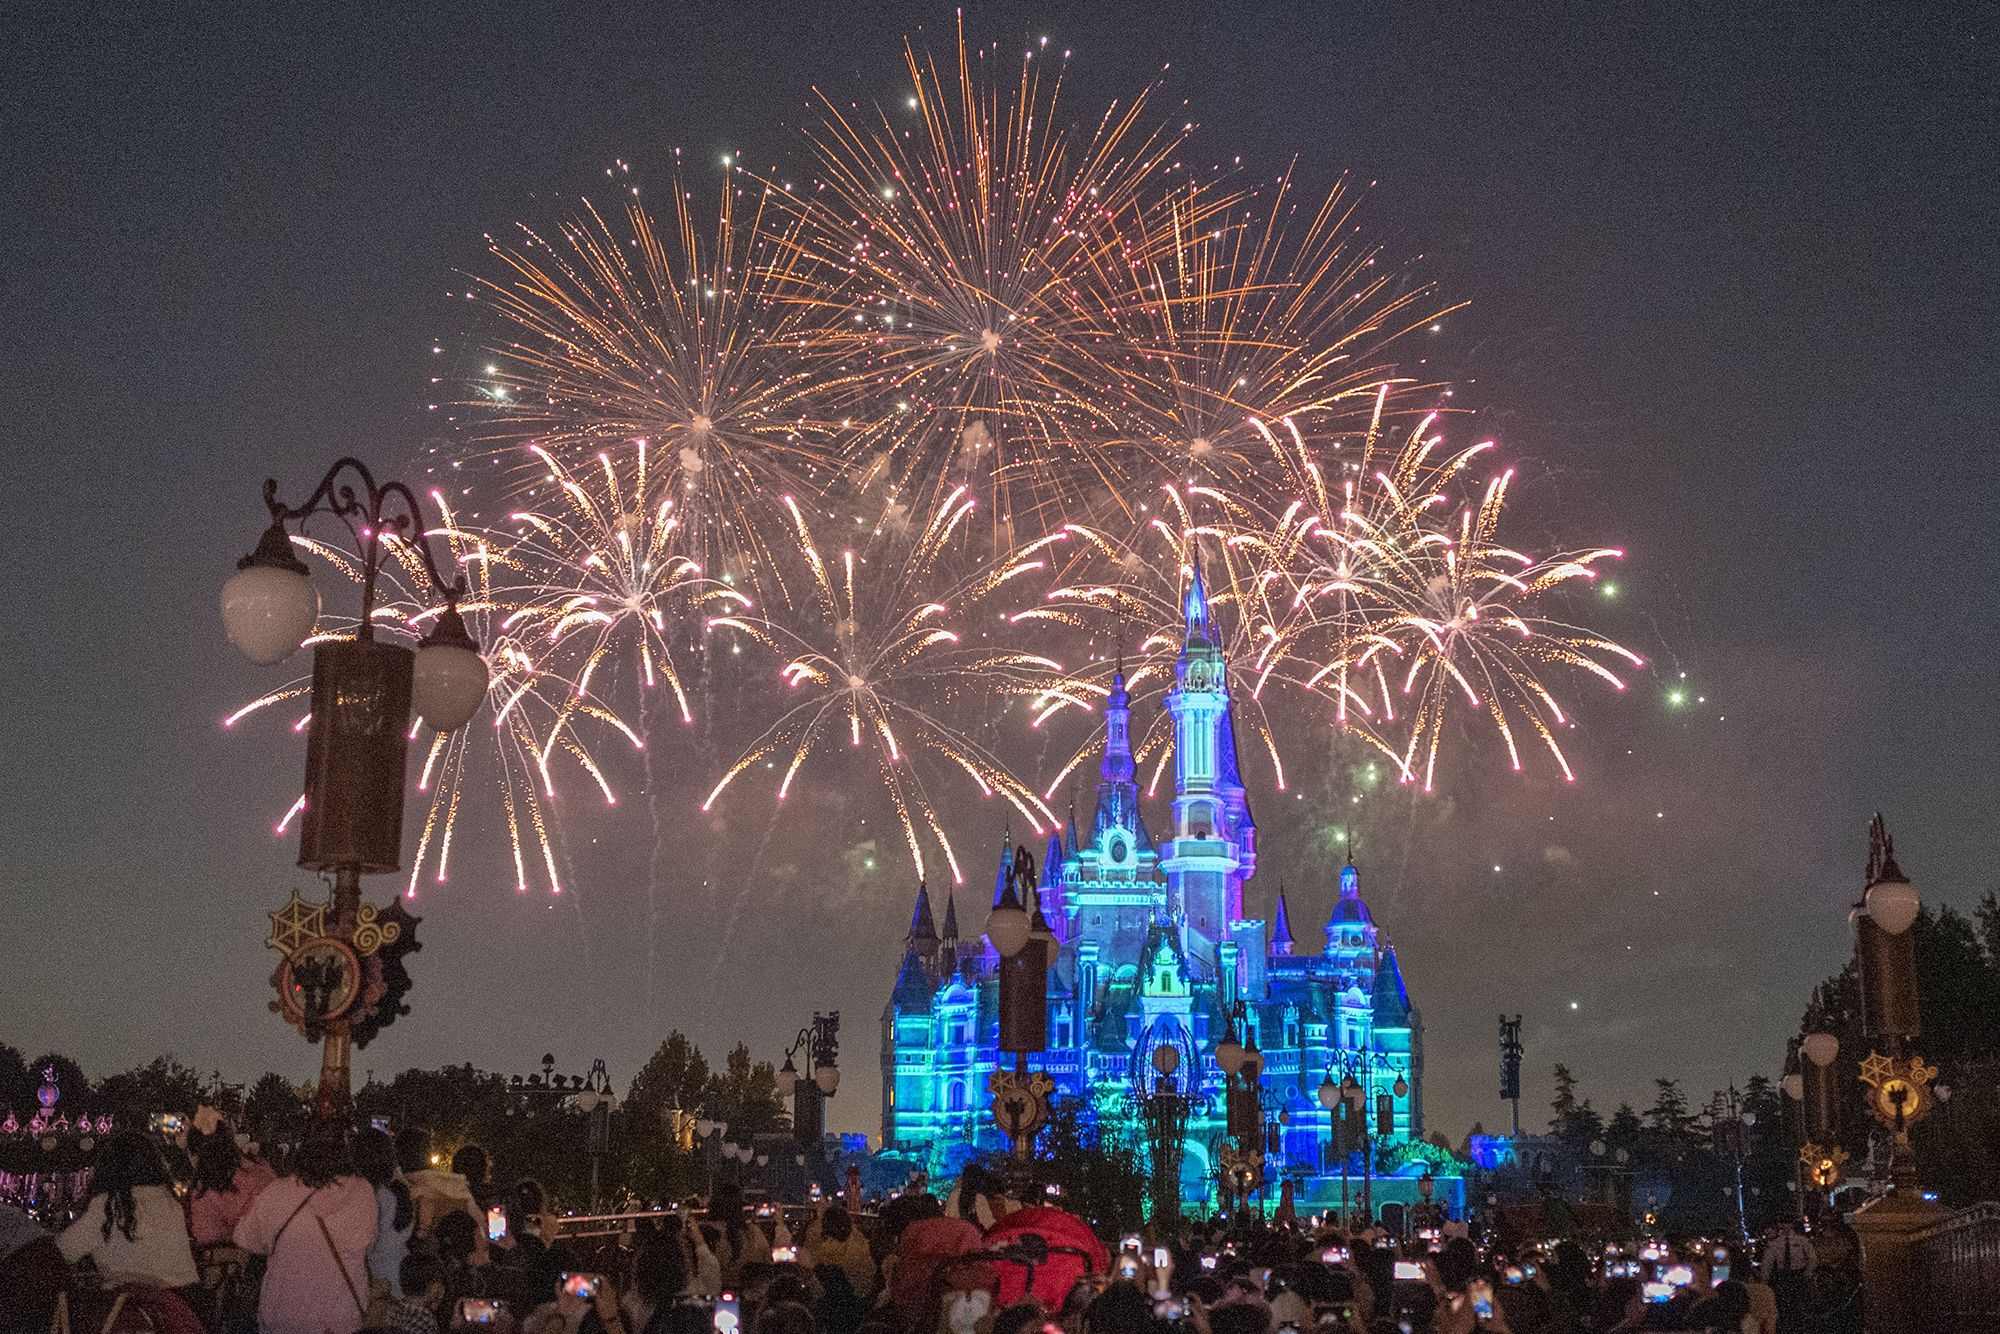 Disney earnings: Company plans to slash costs by $2 billion more